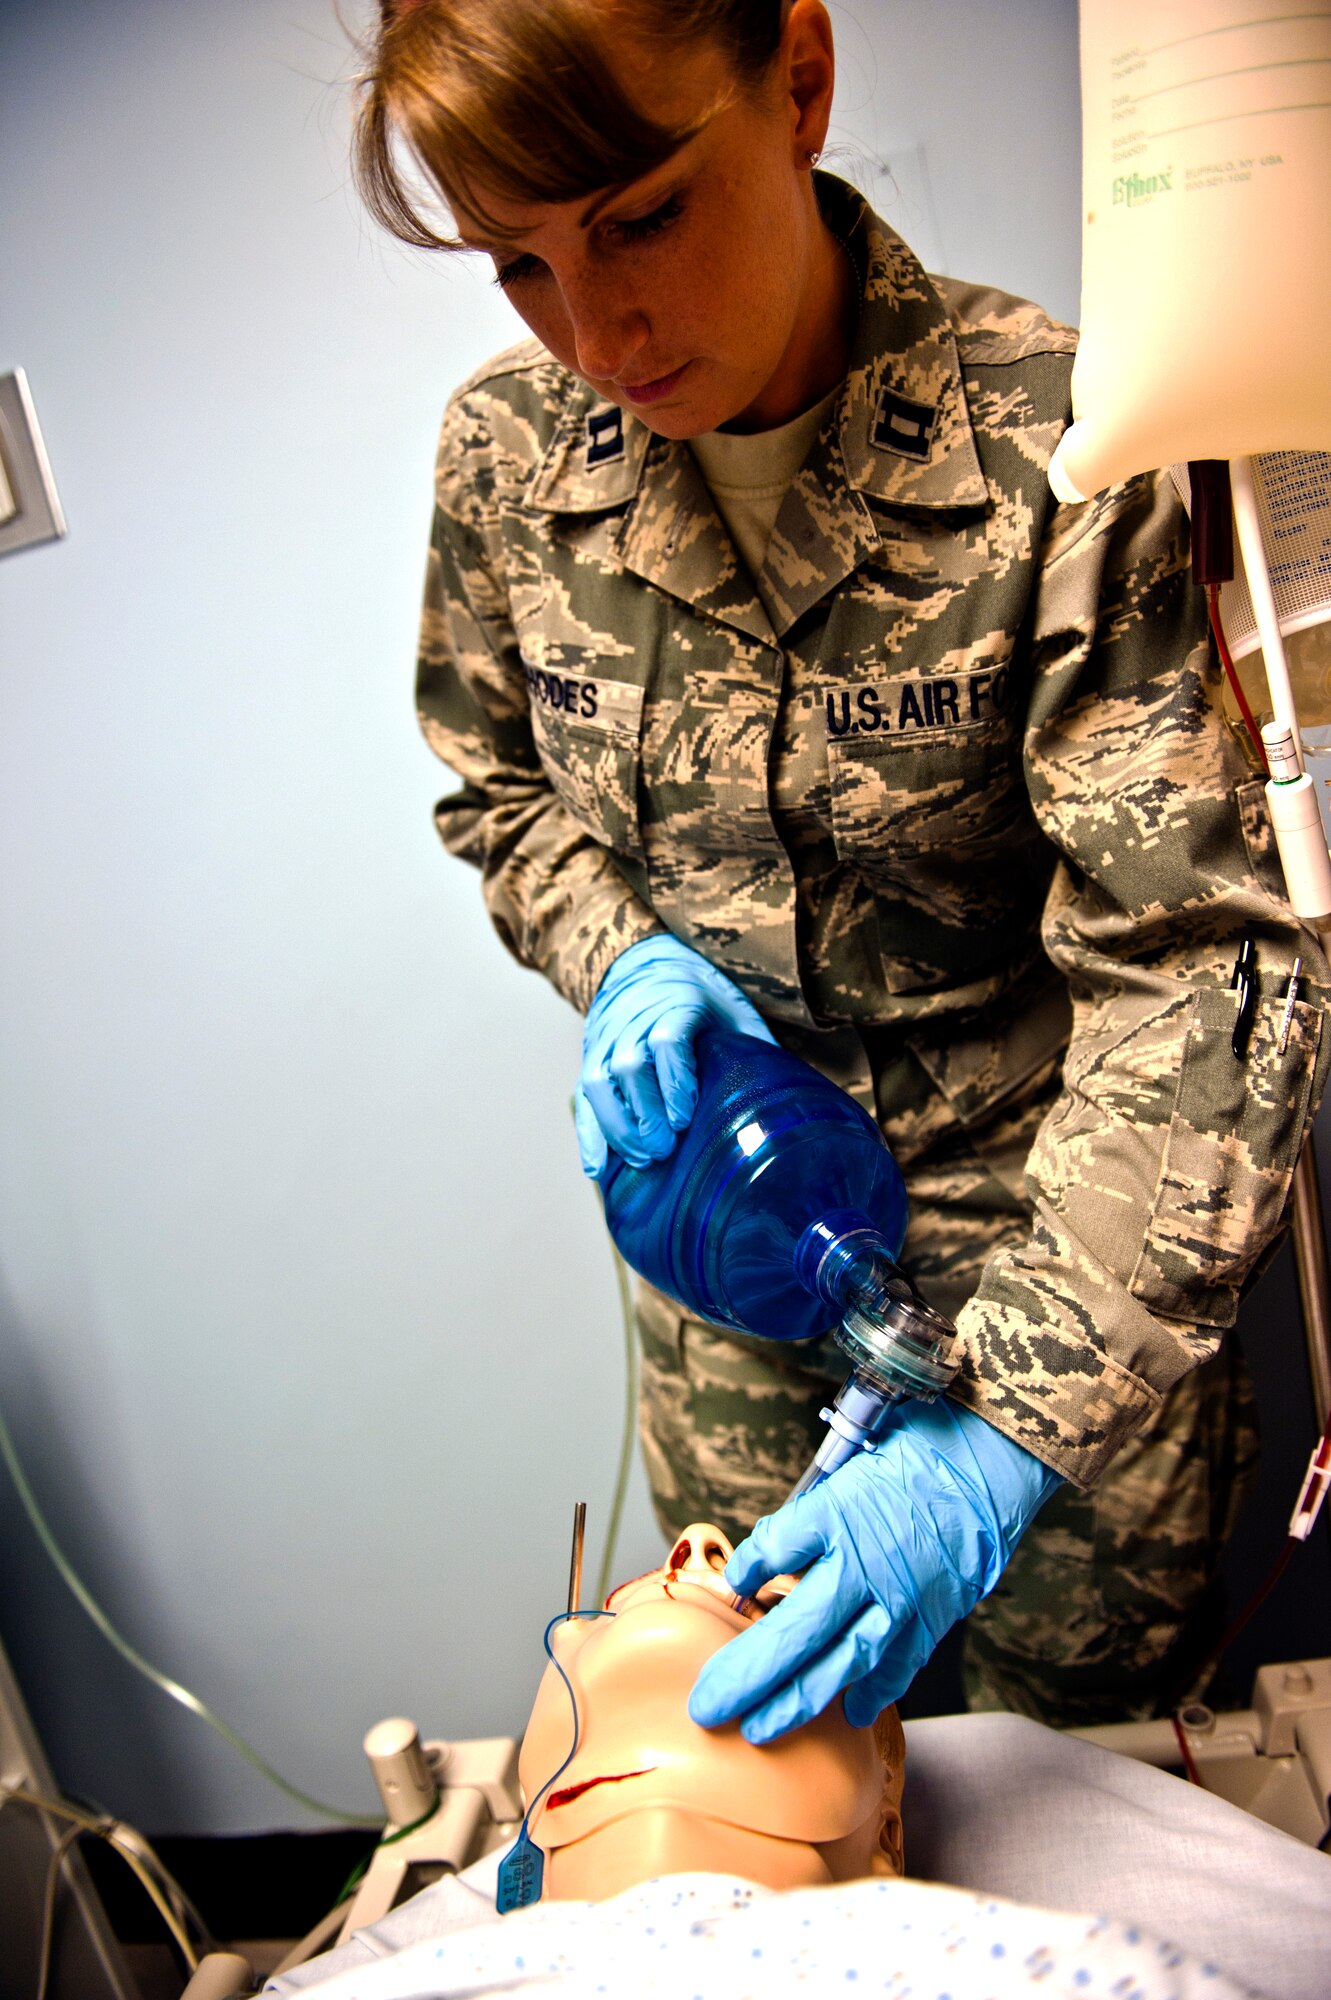 Capt. Rachel Rhodes, 39th Medical Operations Squadron clinical nurse, places a defibrillator into a Sim Man medical dummy during a training scenario June 19, 2013, at Incirlik Air Base, Turkey. The Sim Man can be used as a training tool for almost every kind of medical scenario. (U.S. Air Force photo by Senior Airman Daniel Phelps/Released)